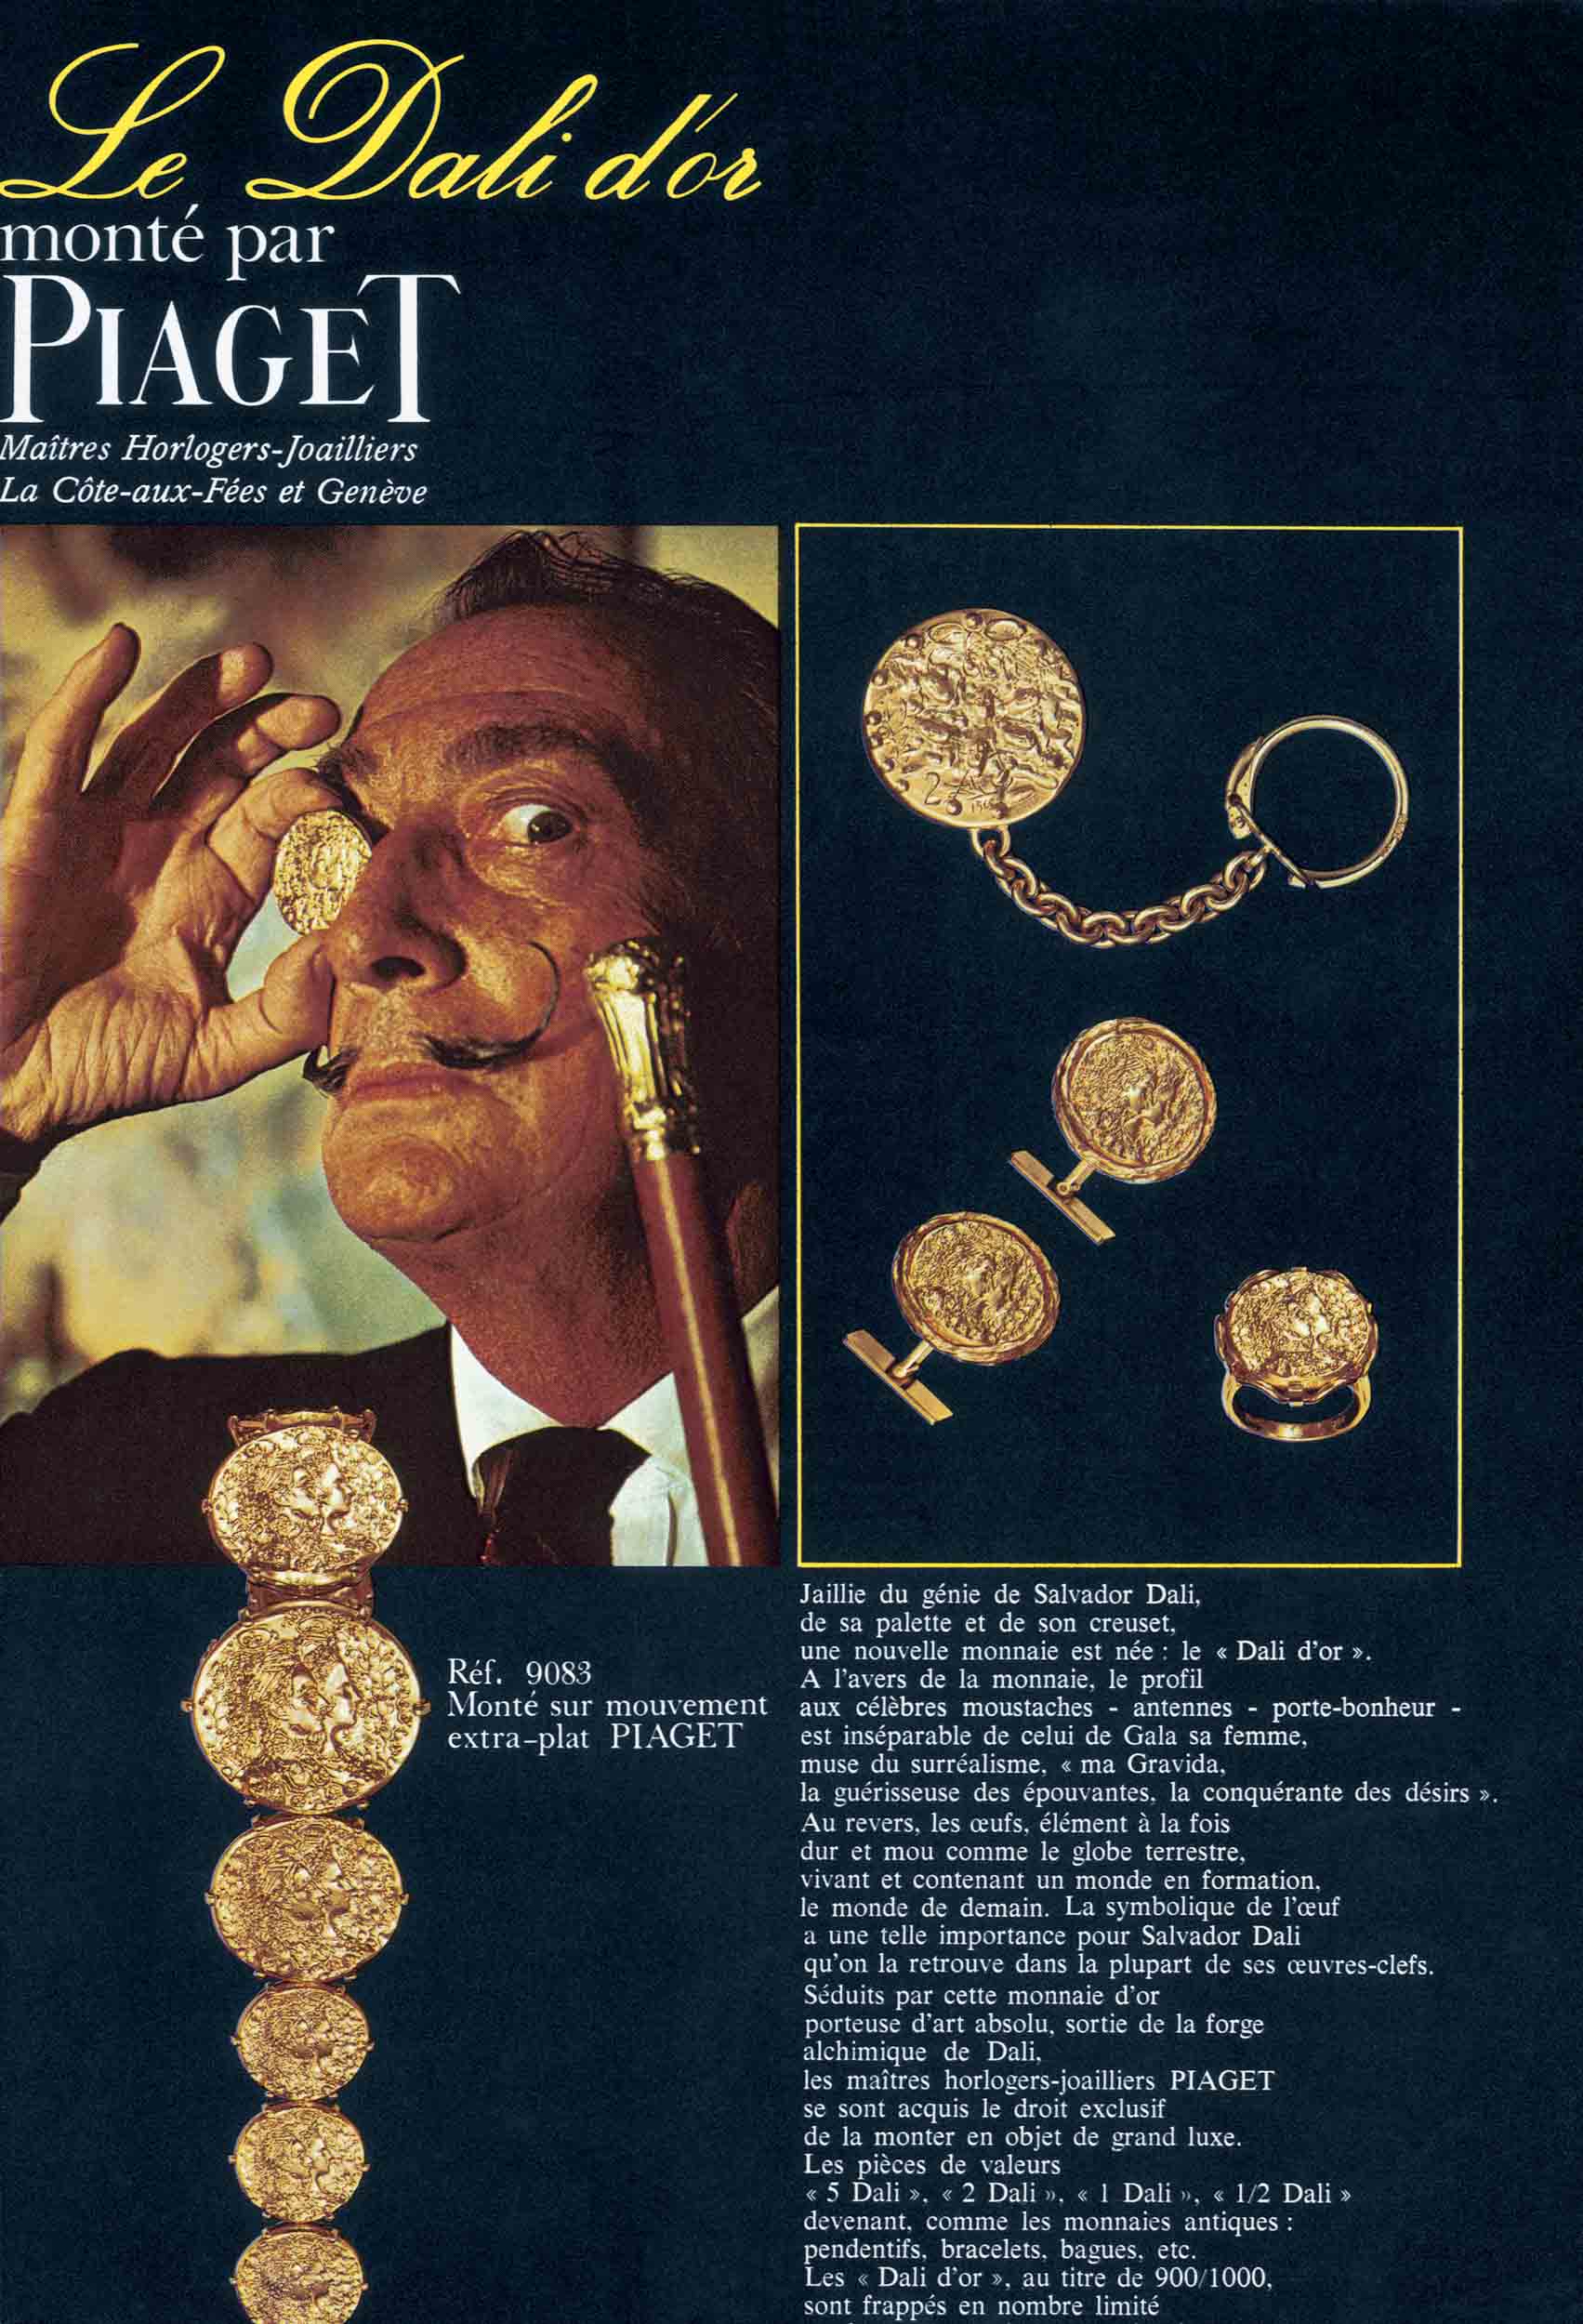 Dali D’or advertising campaign